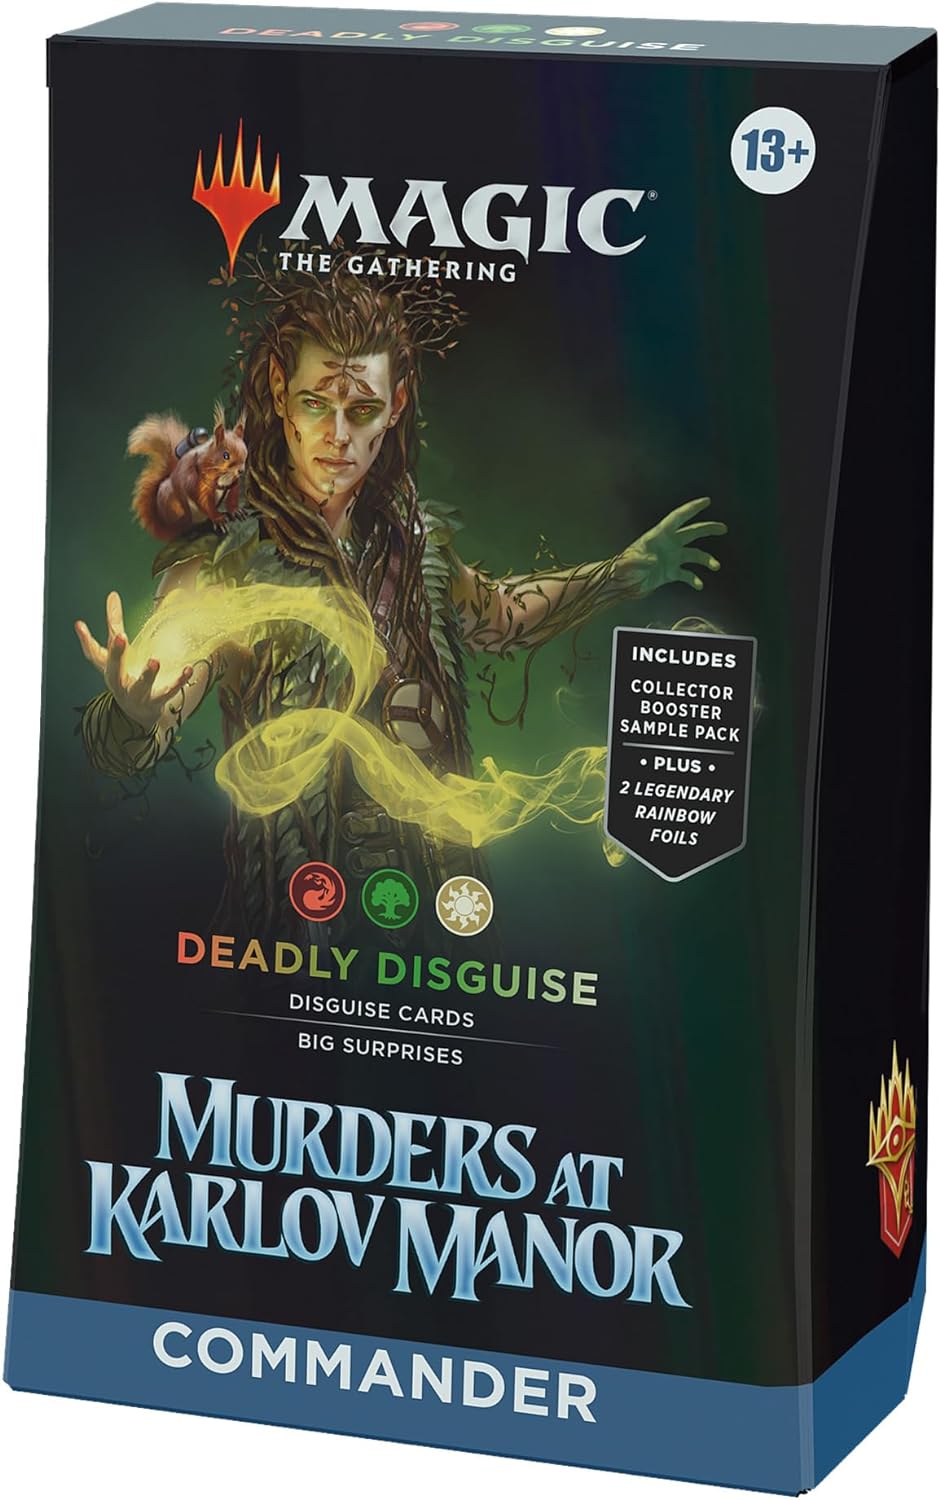 Magic: The Gathering Murders at Karlov Manor Commander Deck - Deadly Disguise - gabescaveccc